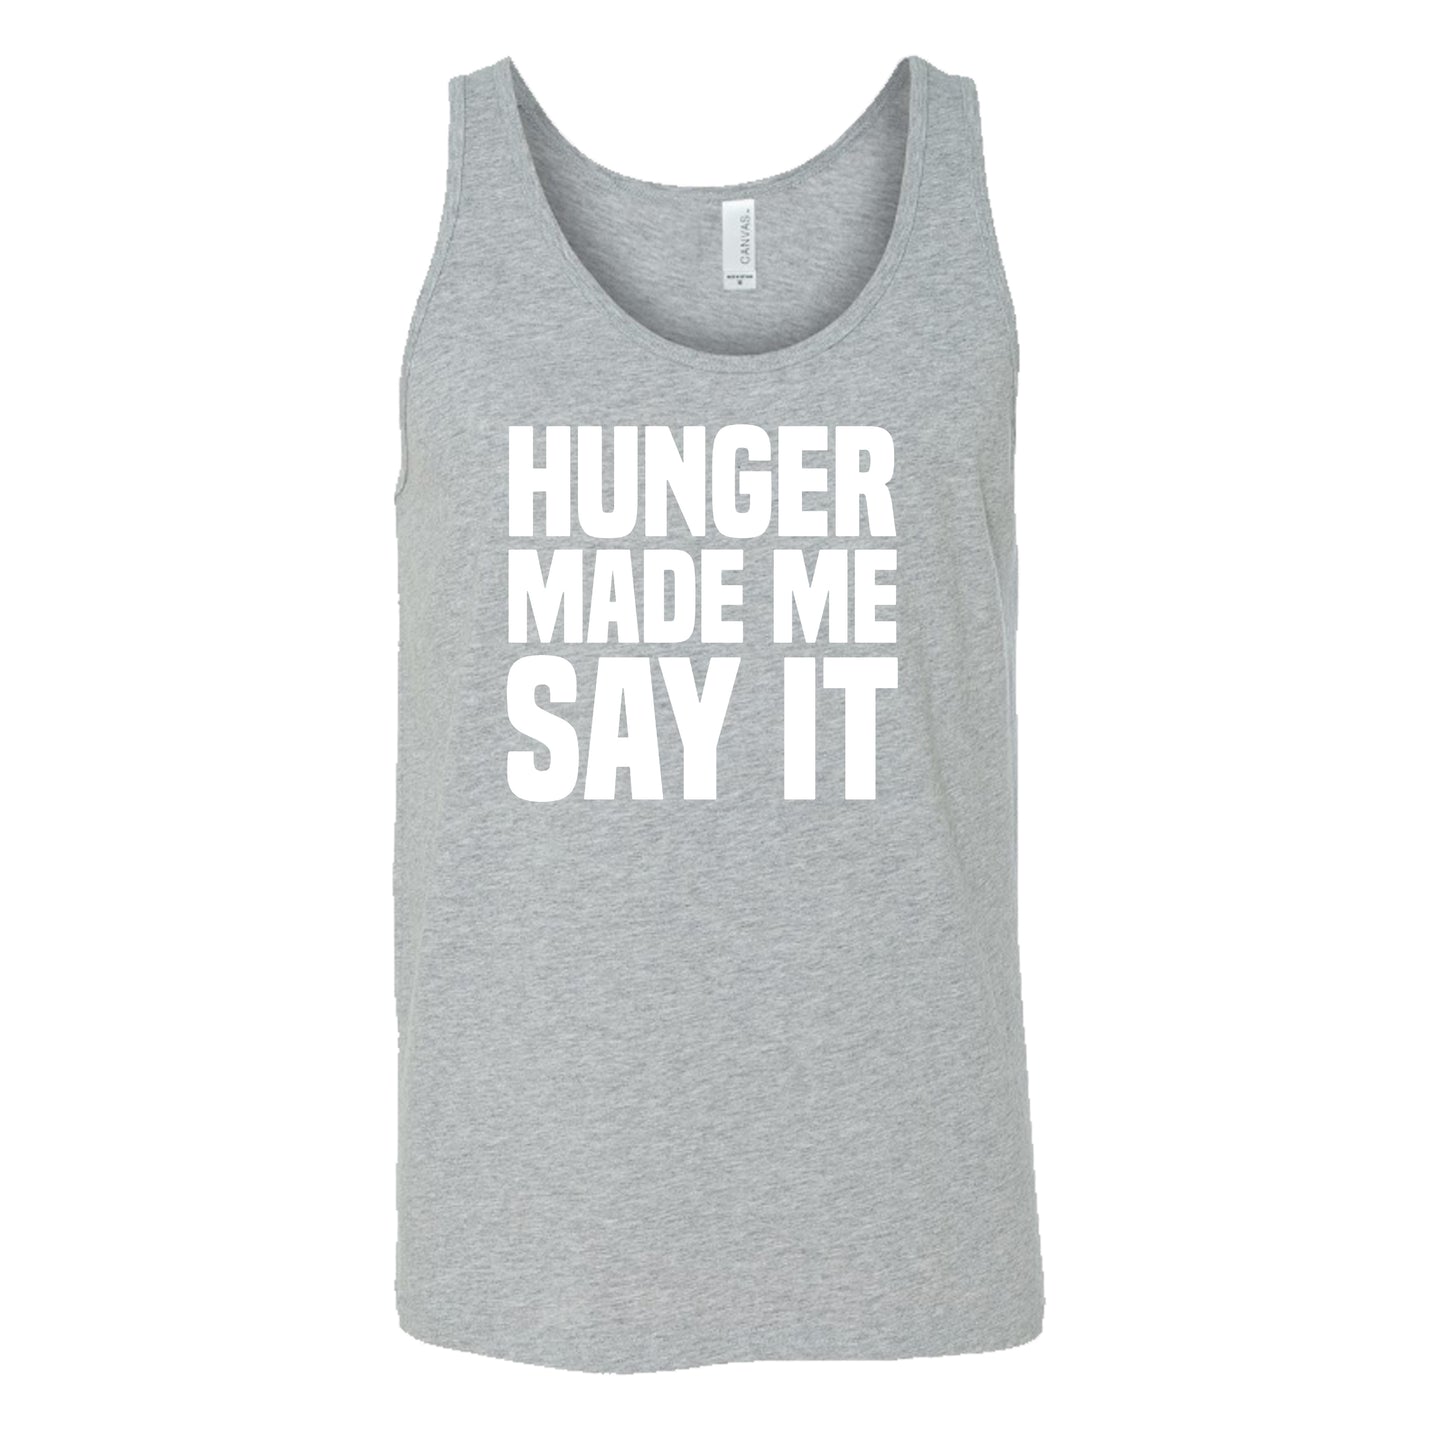 Hunger Made Me Say It Shirt Unisex